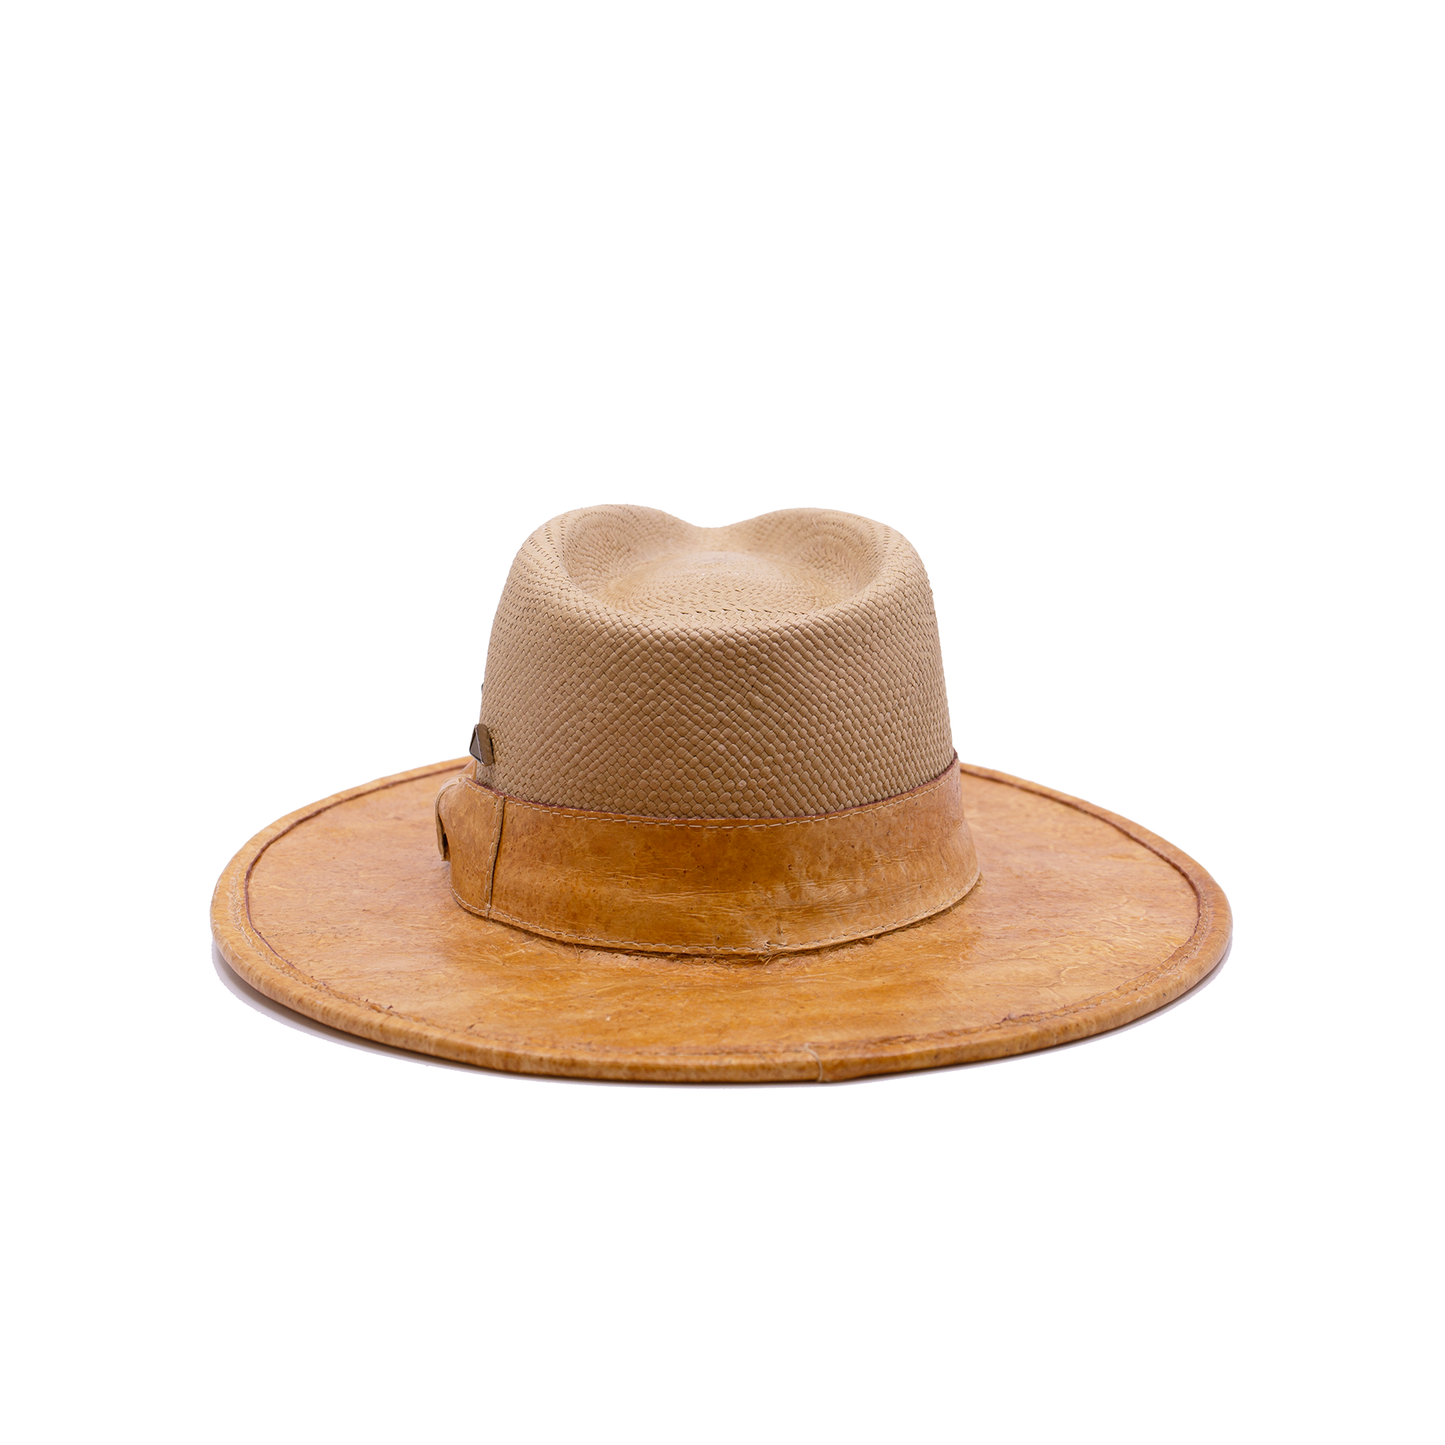 100% Straw Hat in Natural  Ecuadorian Straw Crown  1 1/2" Reishi™ band and bow MycoWorks Fine Mycelium™ leather alternative   NF silver casted gemstone on crown  Reishi™  brim and full binding   Flat brim  Woven in Ecuador  Made in California